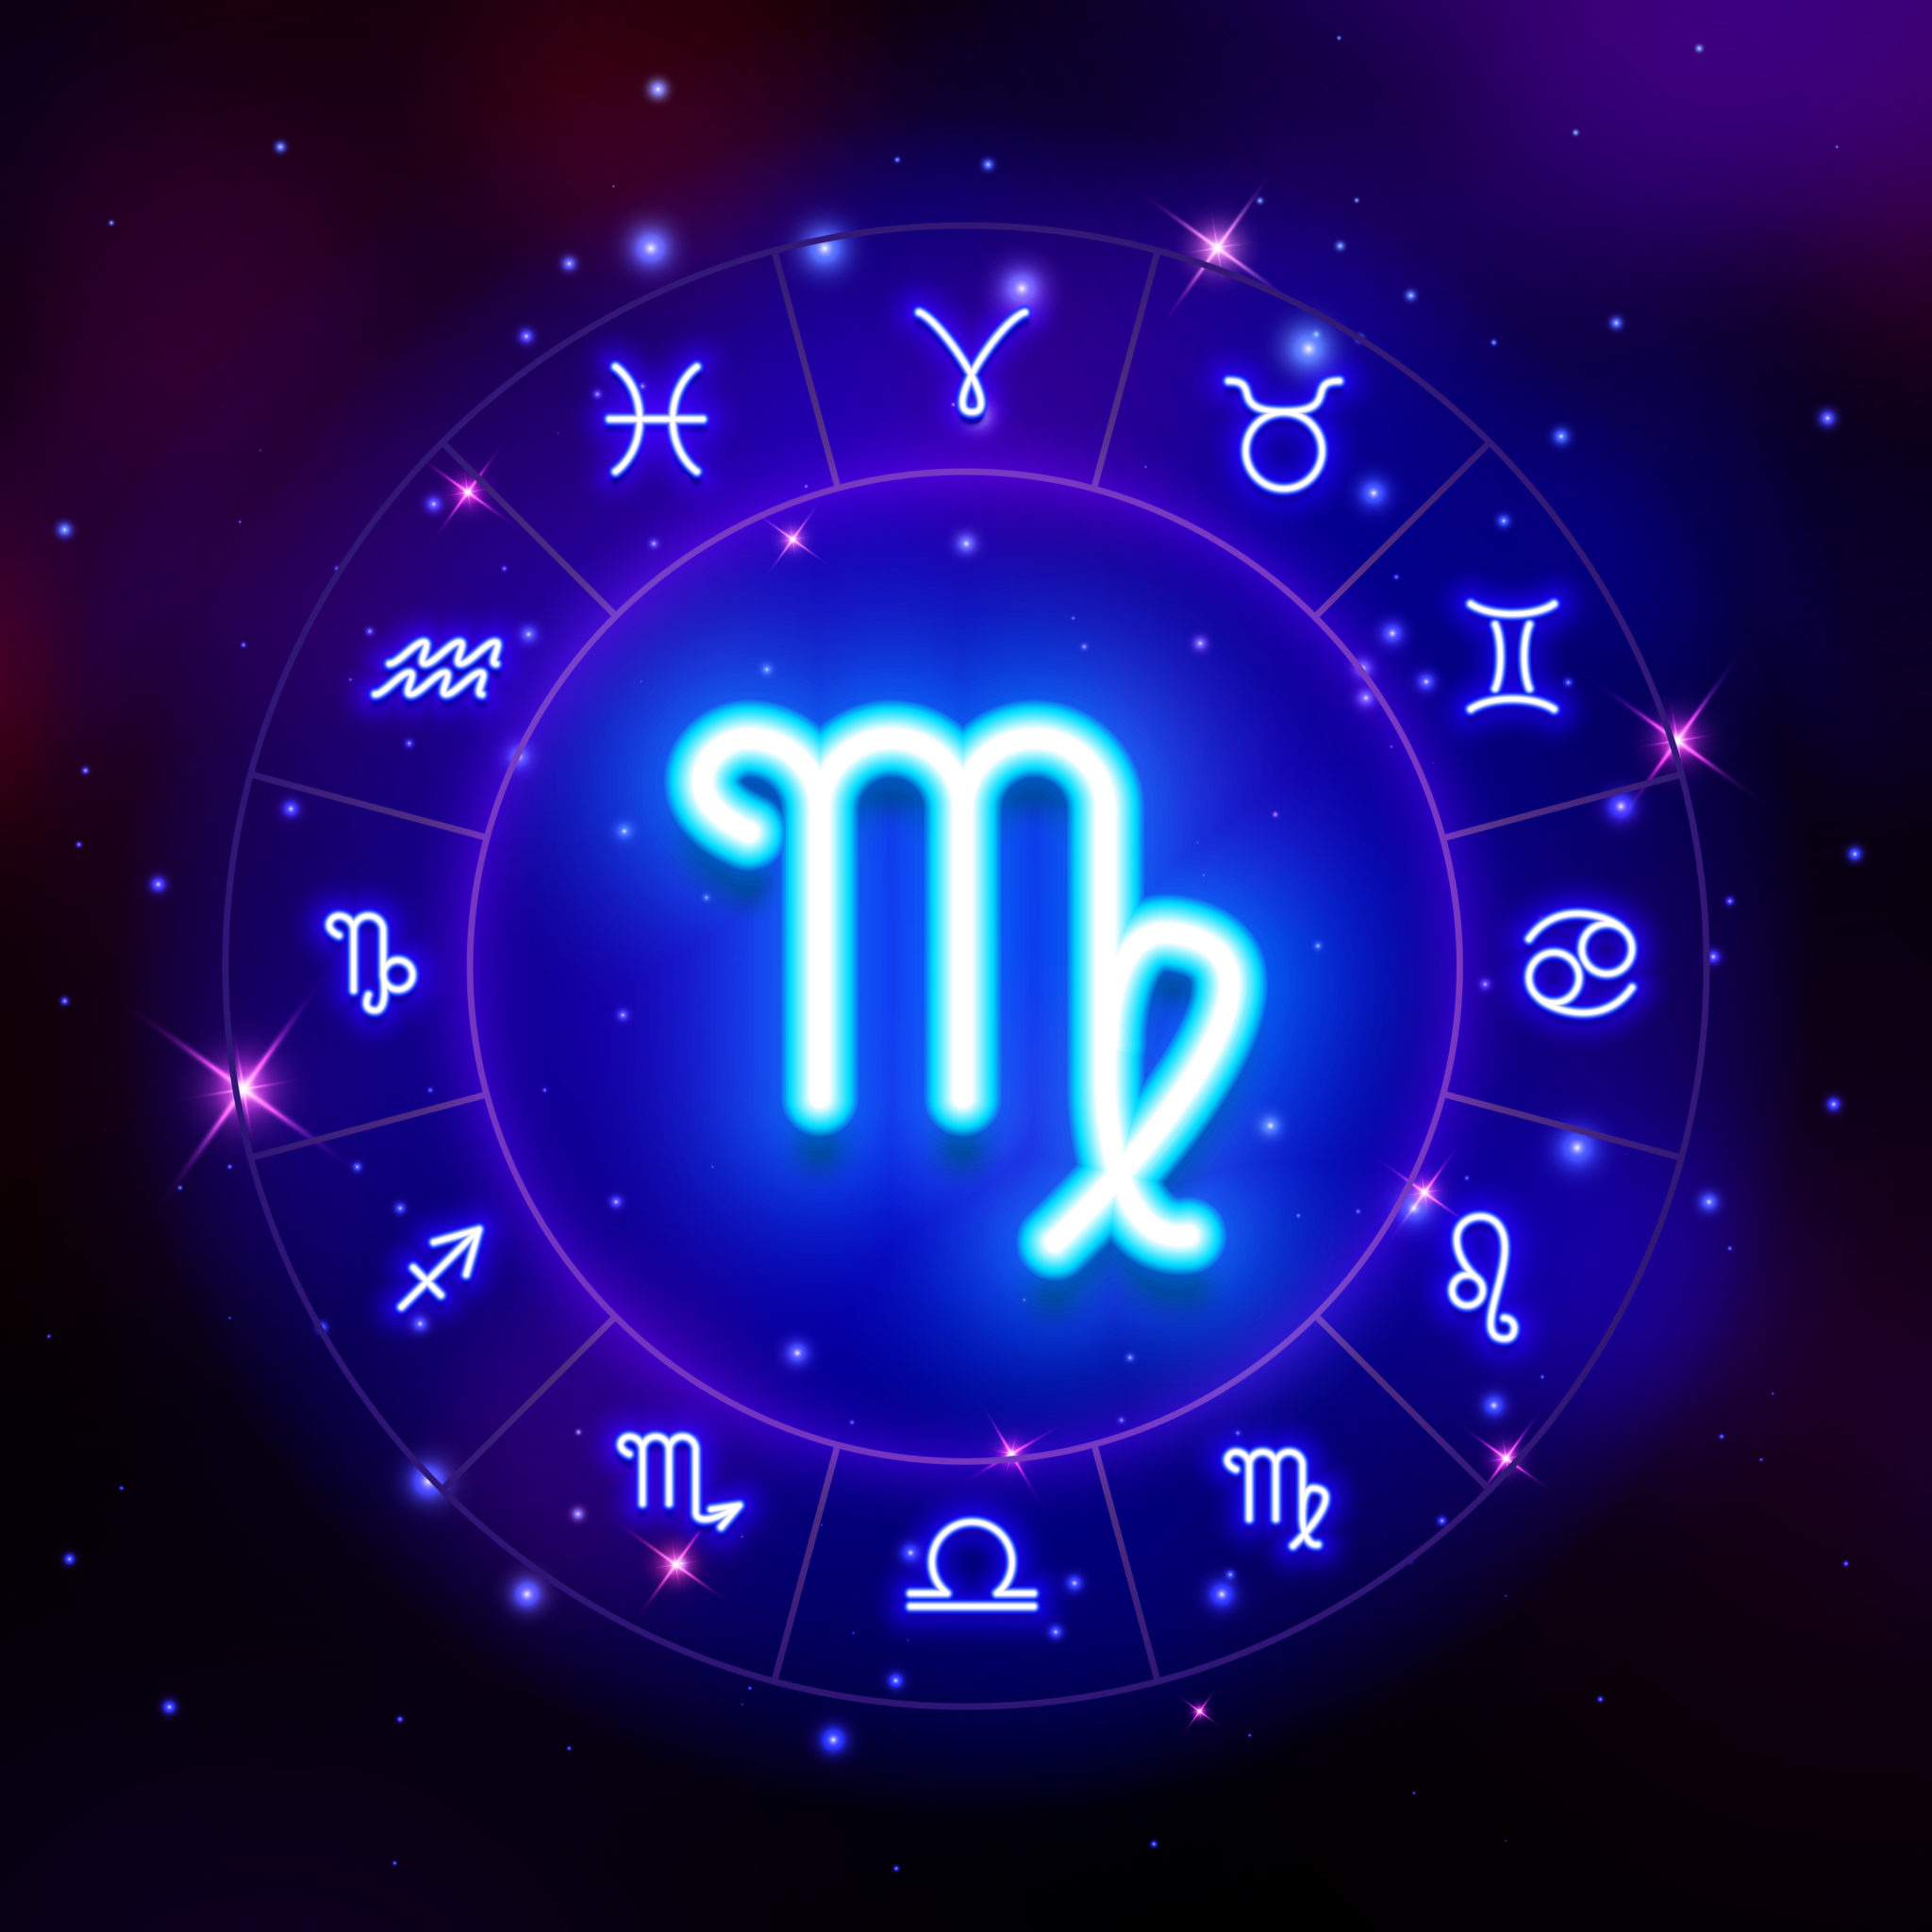 Worst zodiac sign, Transparent background image, Free download, 2050x2050 HD Handy